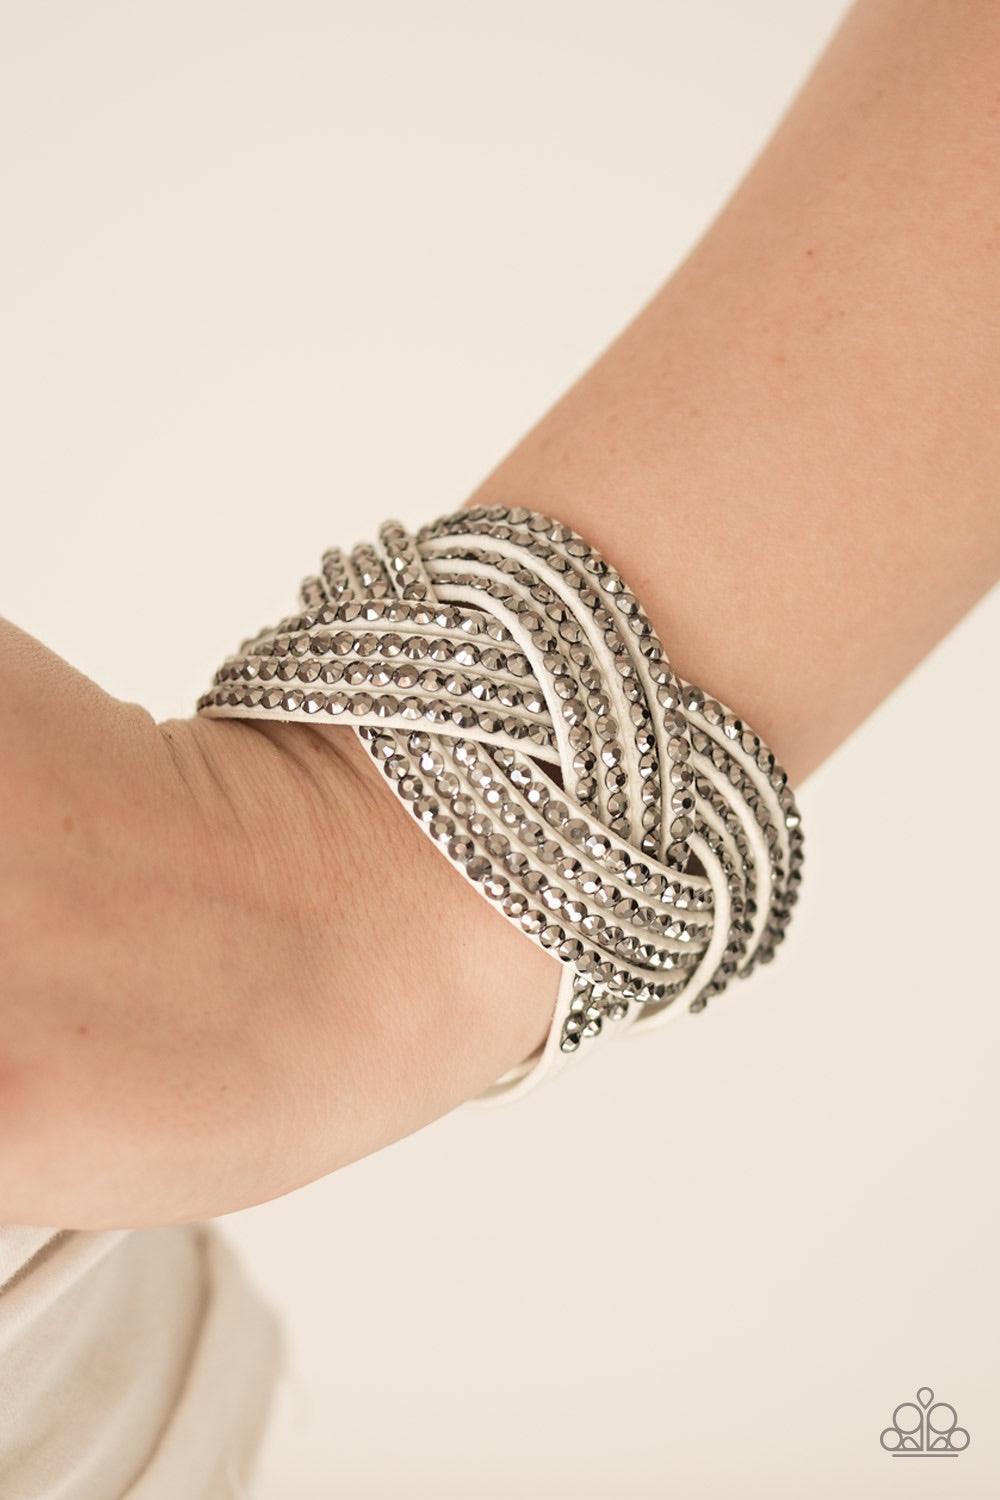 Paparazzi Accessories Top Class Chic - White Oversized hematite rhinestones are encrusted along strands of crisscrossing white suede, creating a fierce shimmer around the wrist. Features an adjustable snap closure. Jewelry